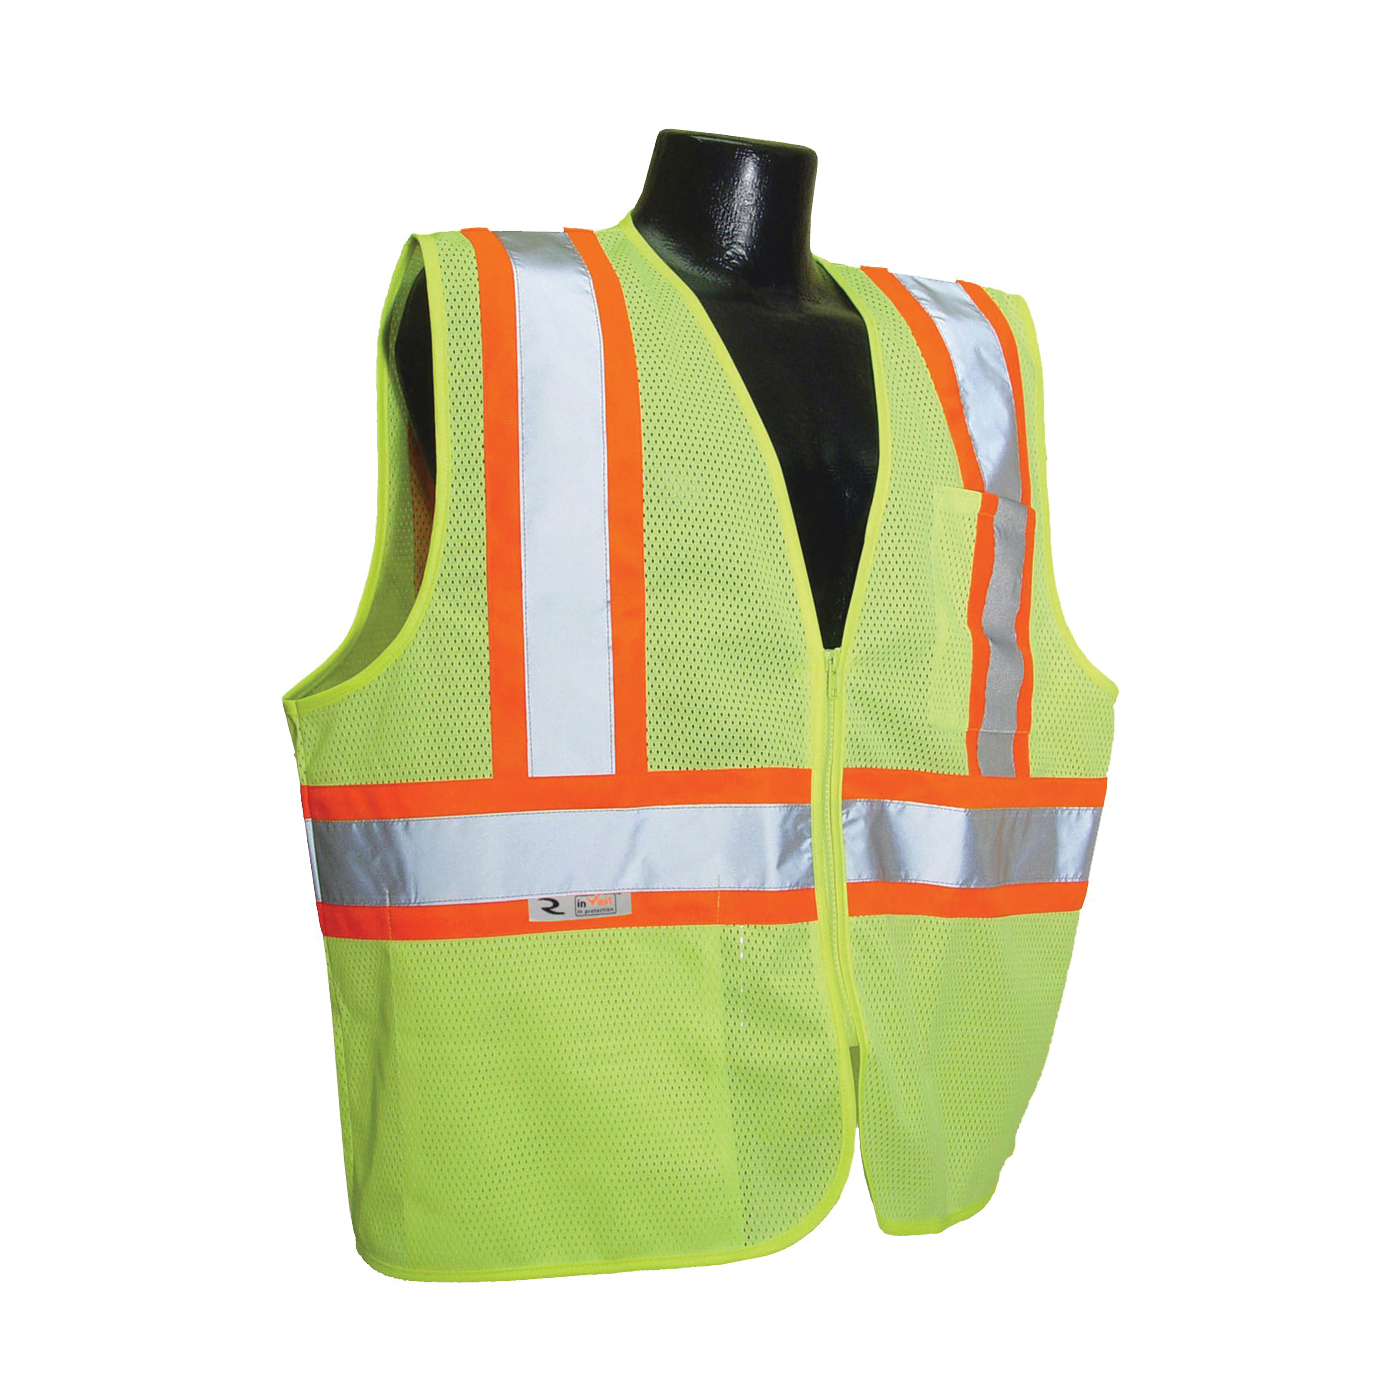 SV22-2ZGM-XL Economical Safety Vest, XL, Unisex, Fits to Chest Size: 28 in, Polyester, Green, Zipper Closure